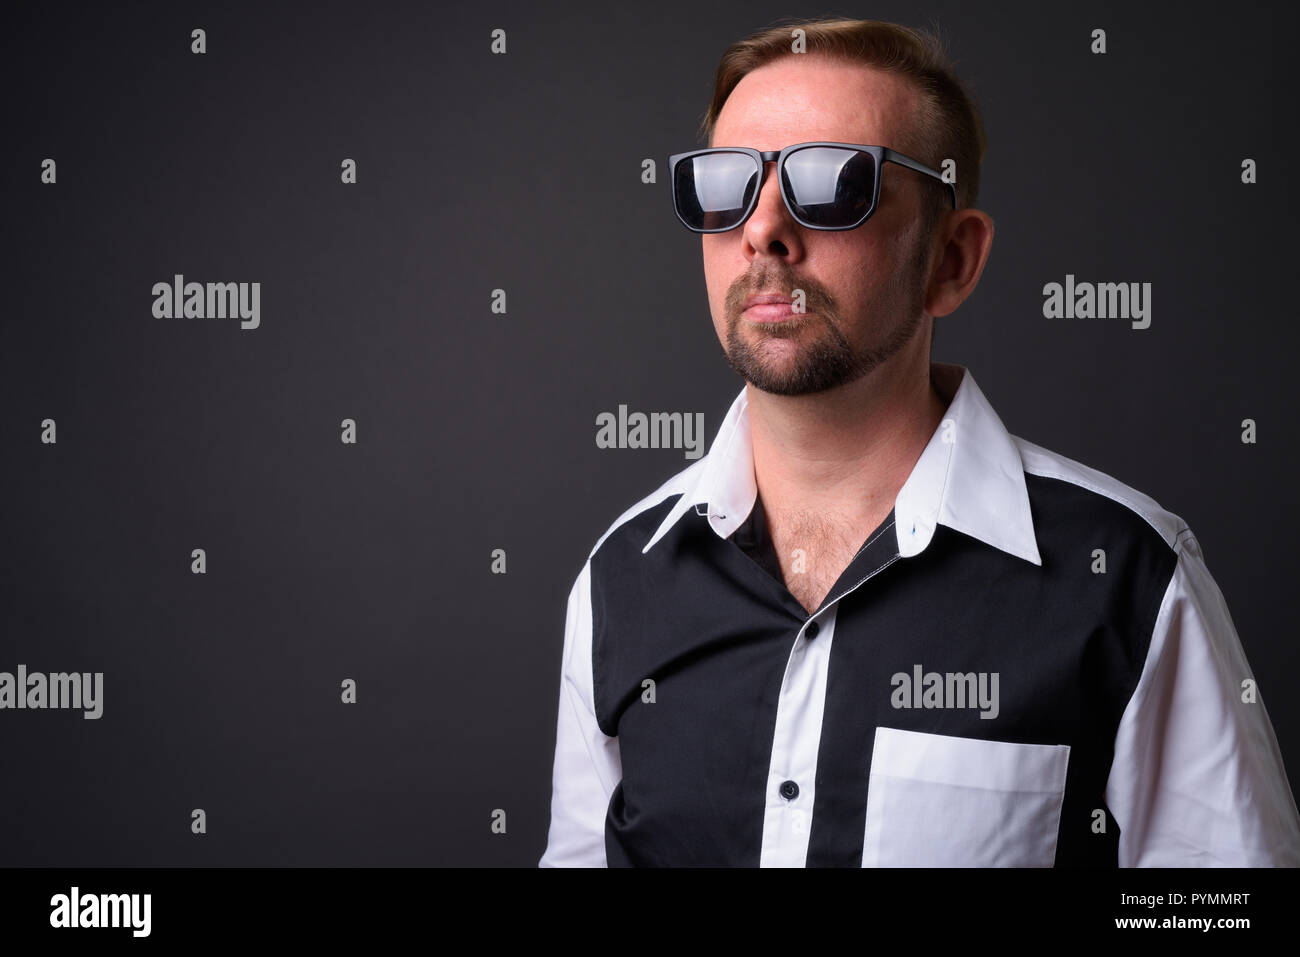 Blond bearded businessman with goatee against gray background Stock Photo